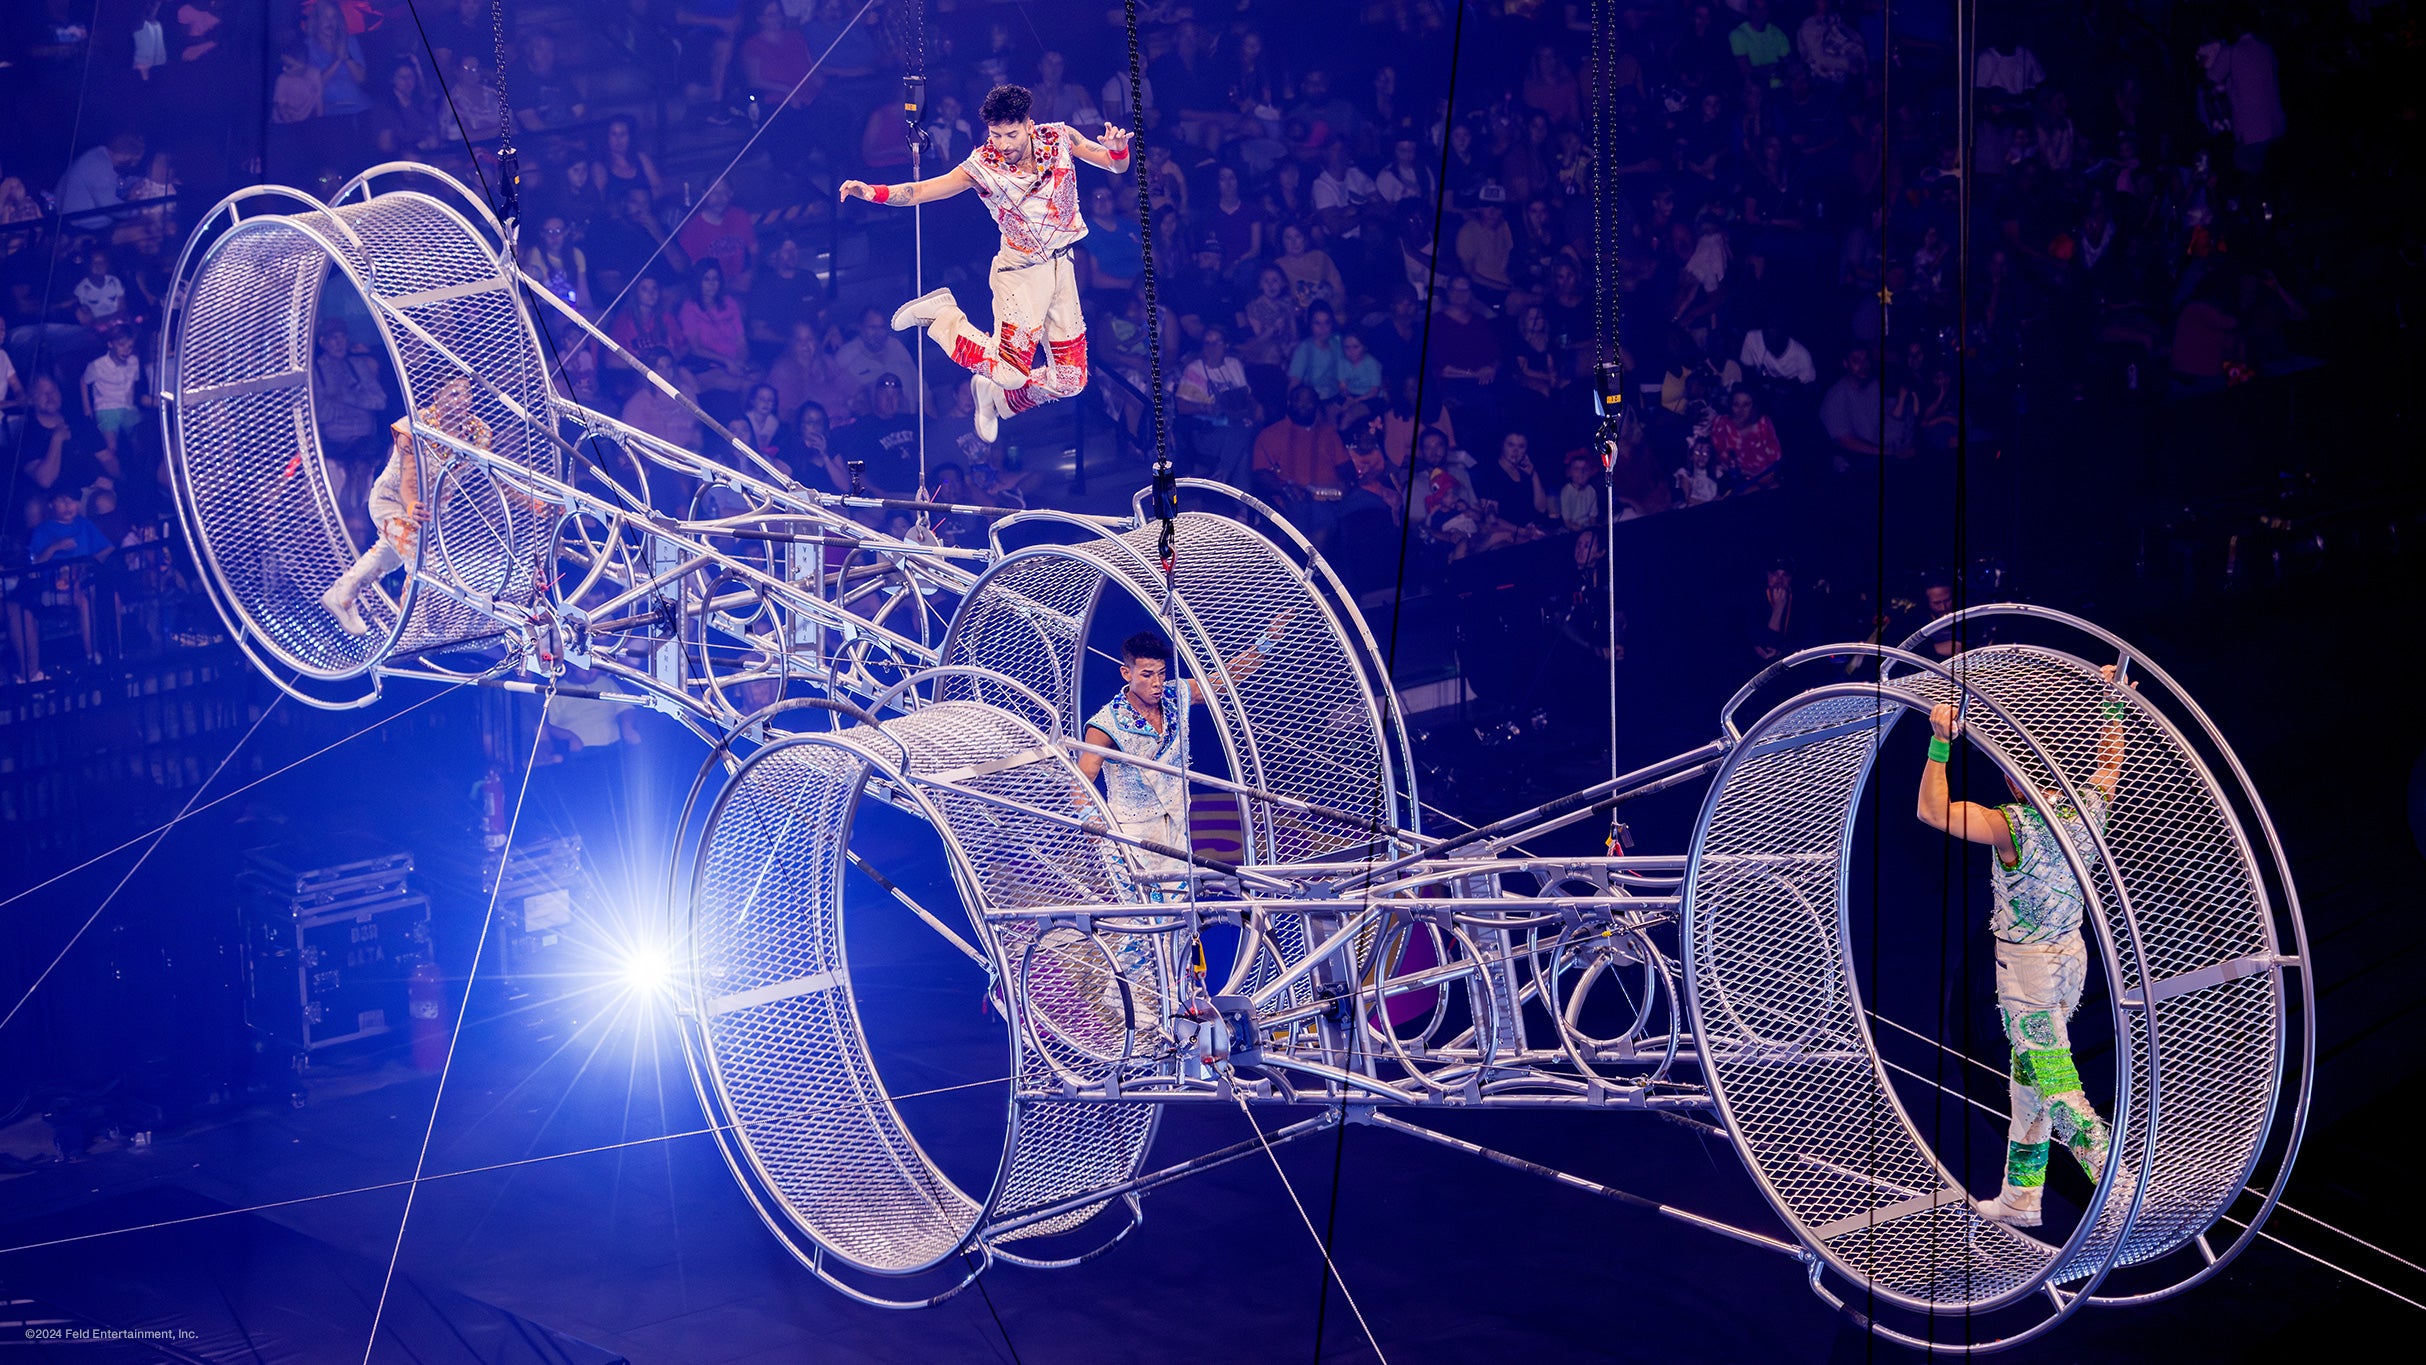 Ringling Bros. and Barnum & Bailey presents The Greatest Show On Earth presales in Grand Rapids